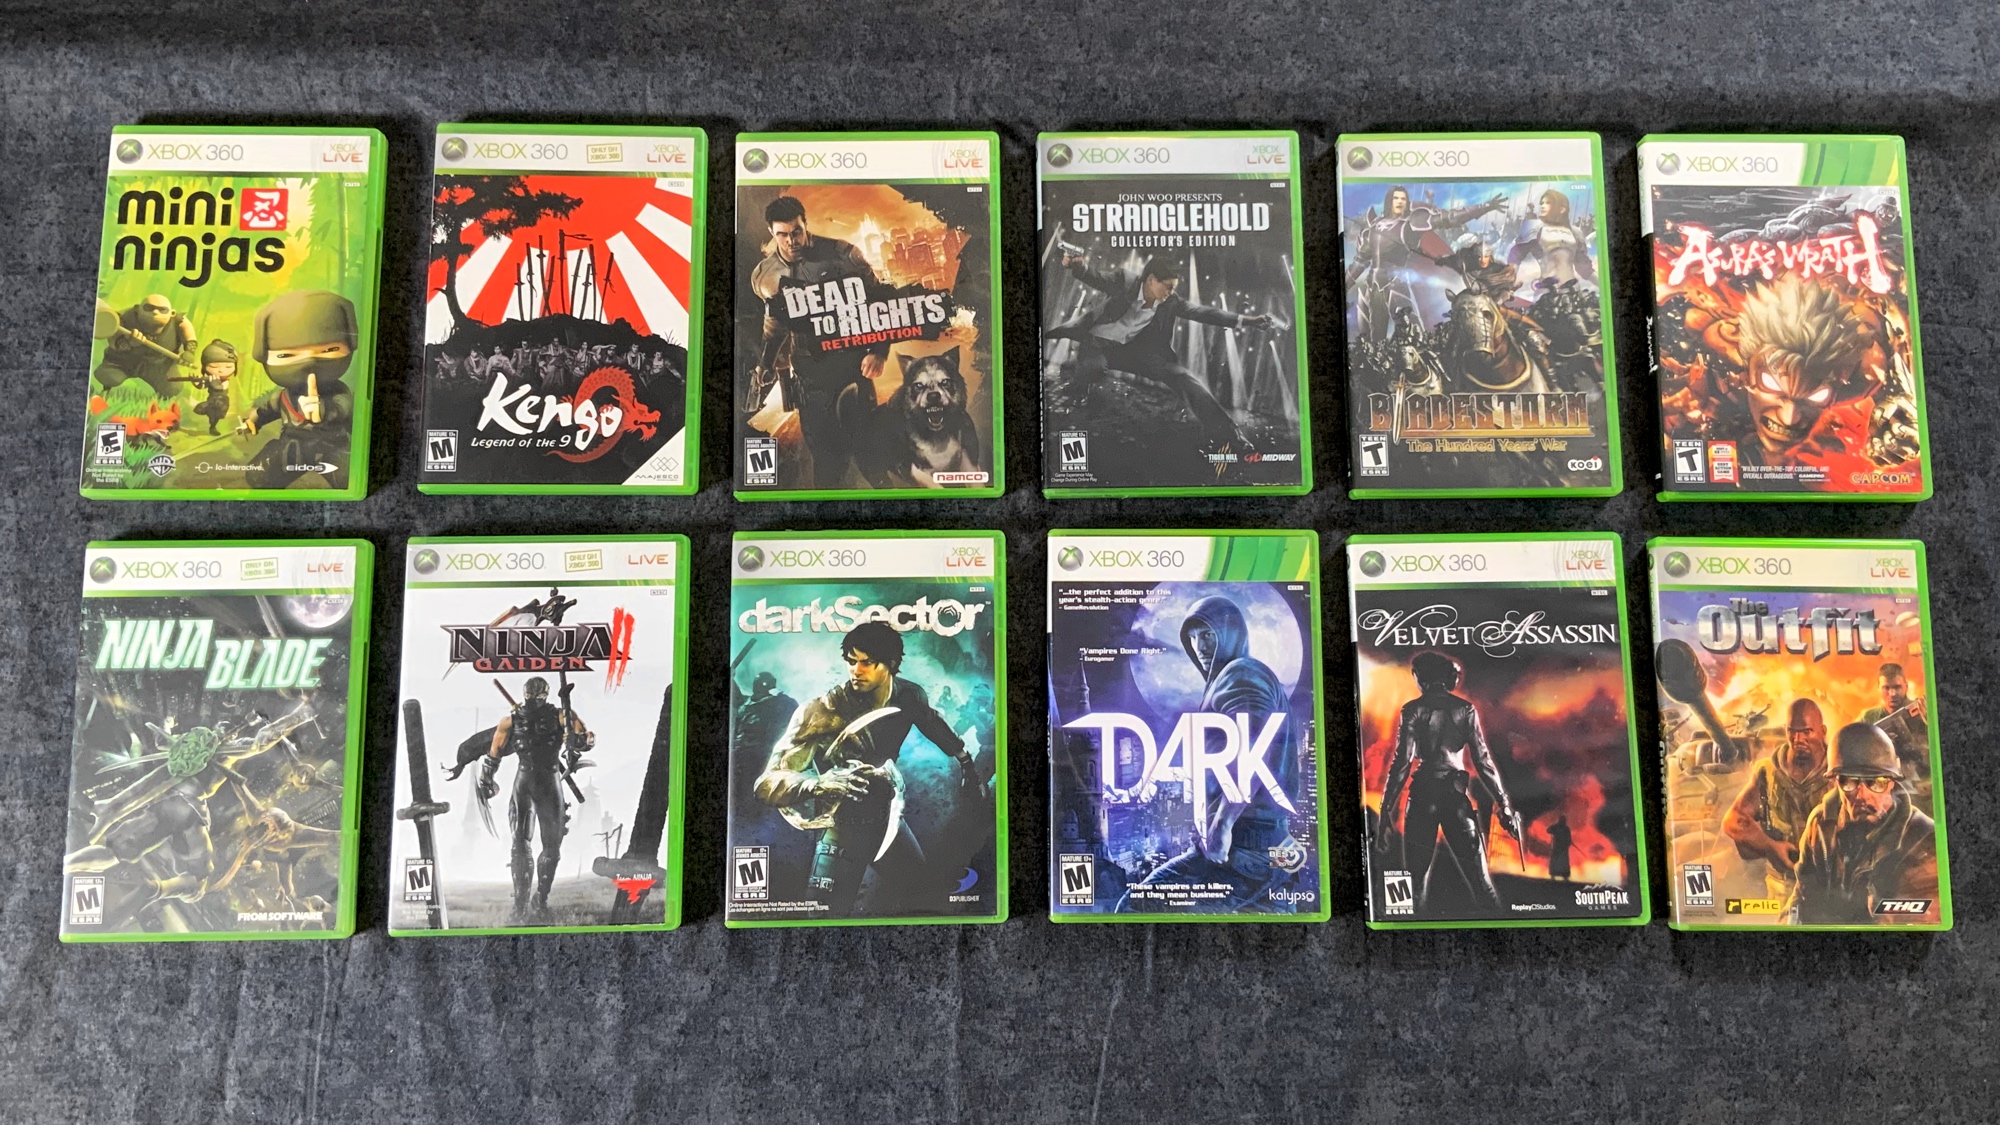 Metal Jesus Rocks on Twitter: "I quickly showed these Xbox 360 games in my  video. Curious which ones you've played &amp; would you consider any of  them "Hidden Gems"? https://t.co/yLoKLLeMUa https://t.co/wyZwGdwQvr" /